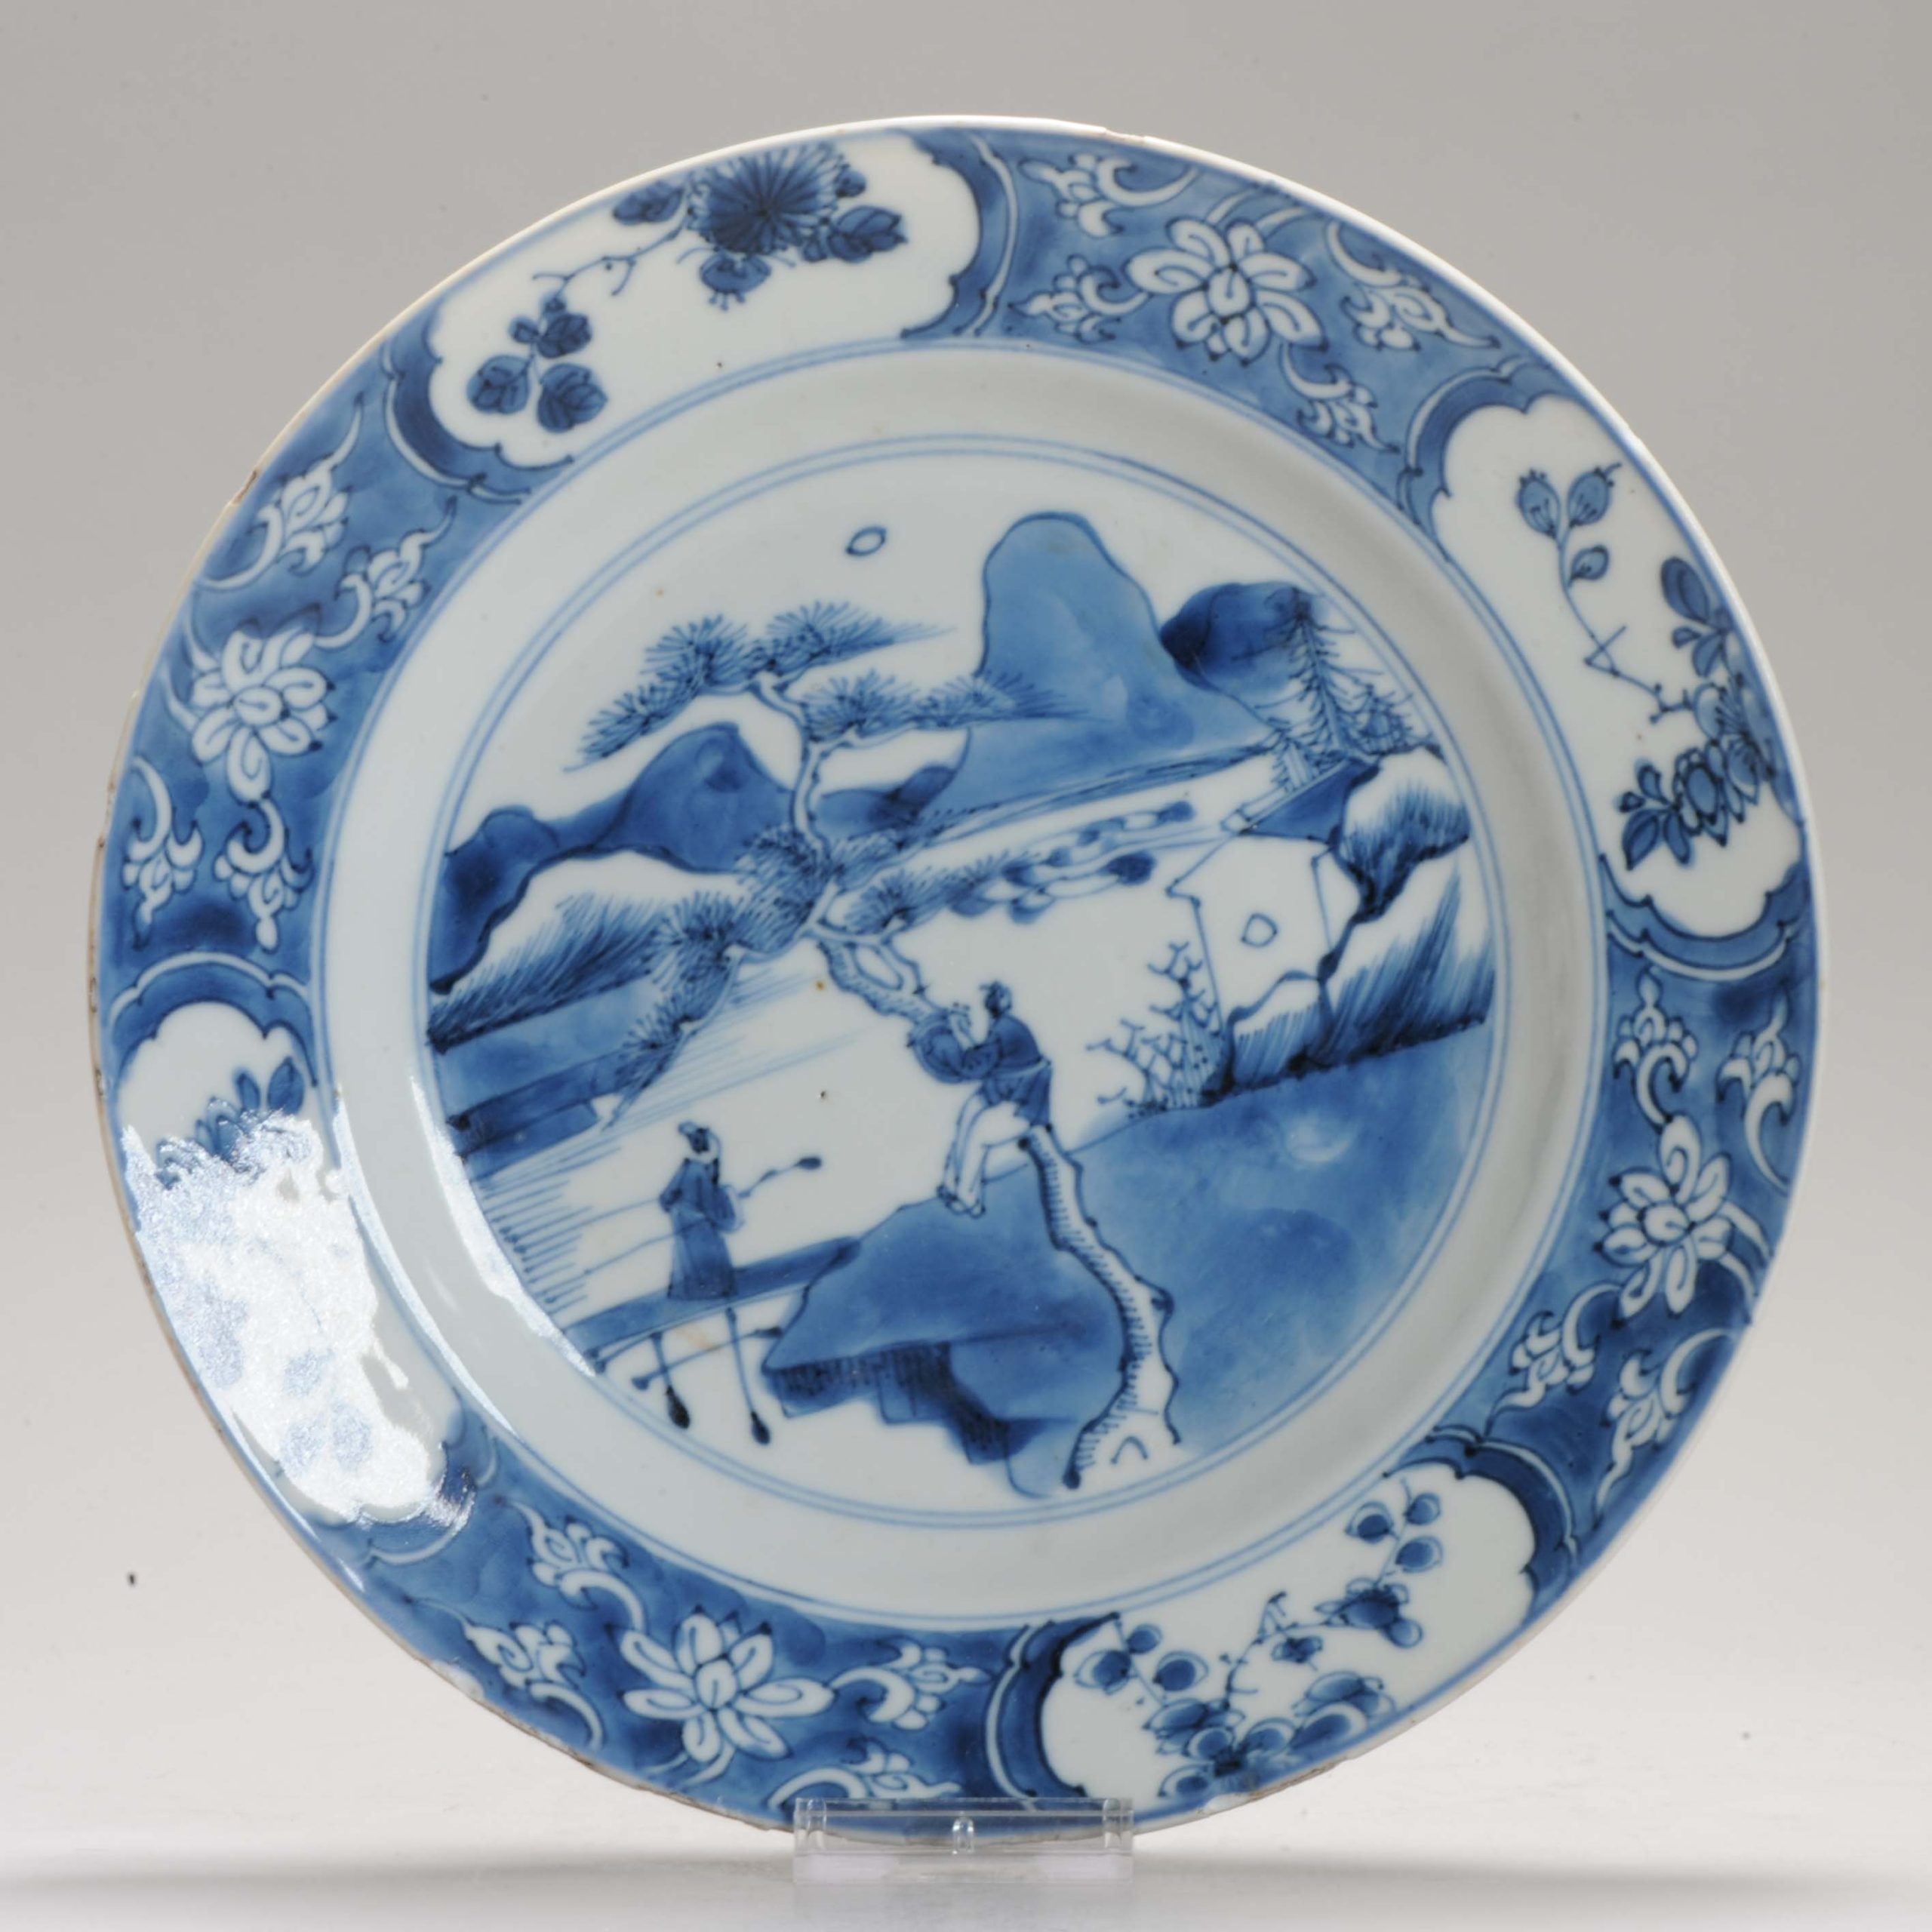 Antique Ca 1700 Chinese Porcelain Kangxi Blue and White Plate with blue border